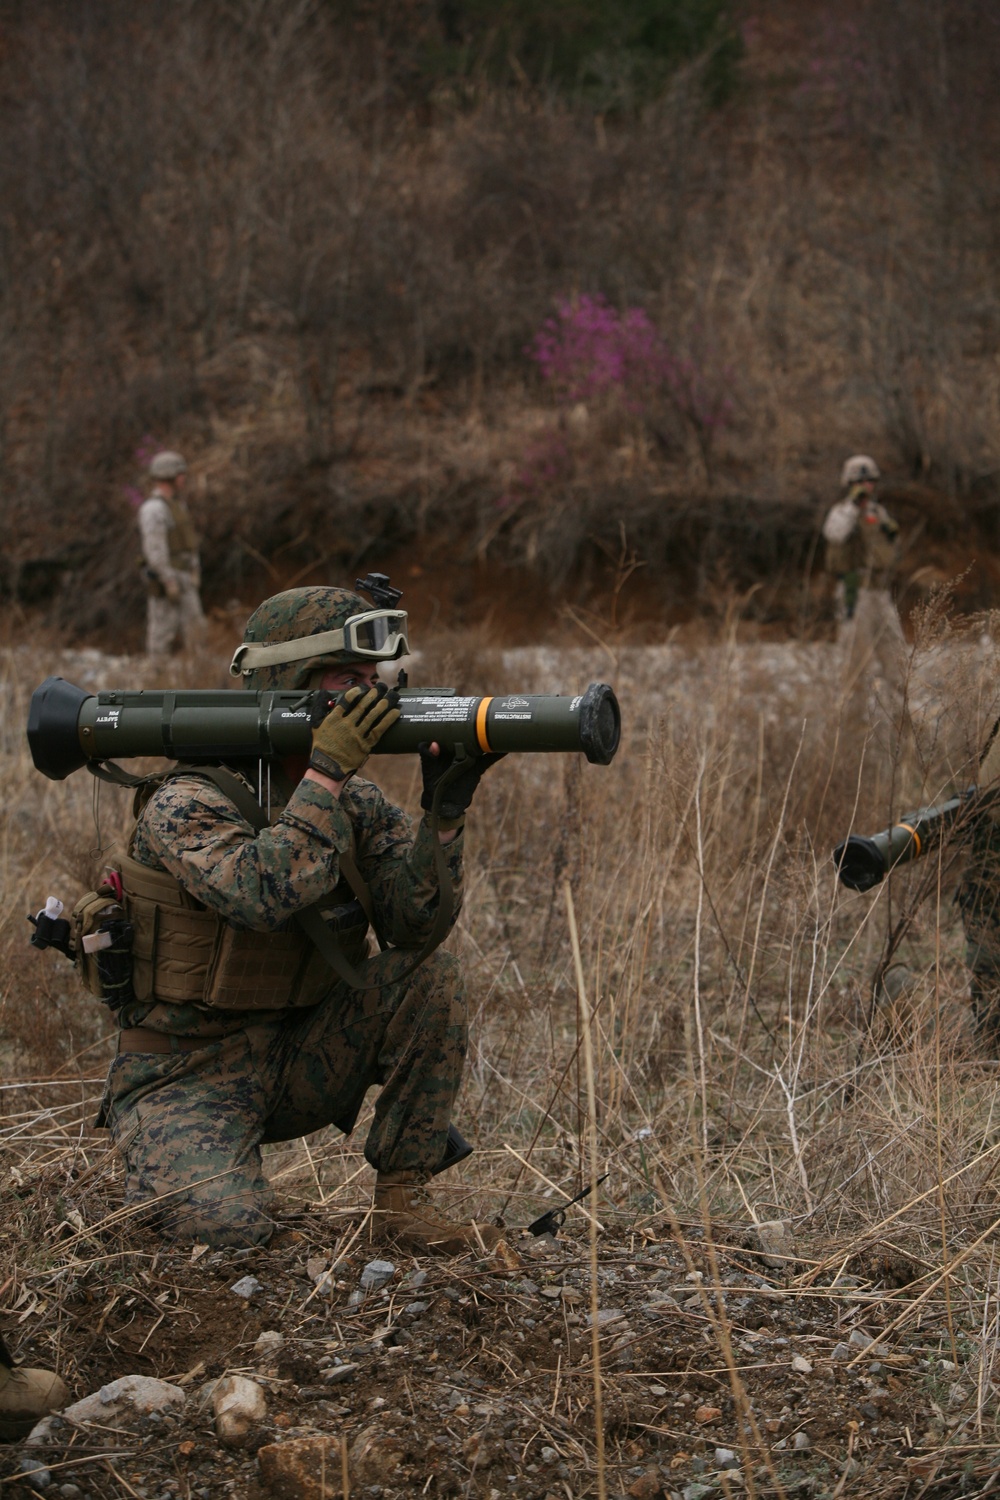 Marine from Pembroke, Mass. prepares to fire rocket during Ssang Yong 14